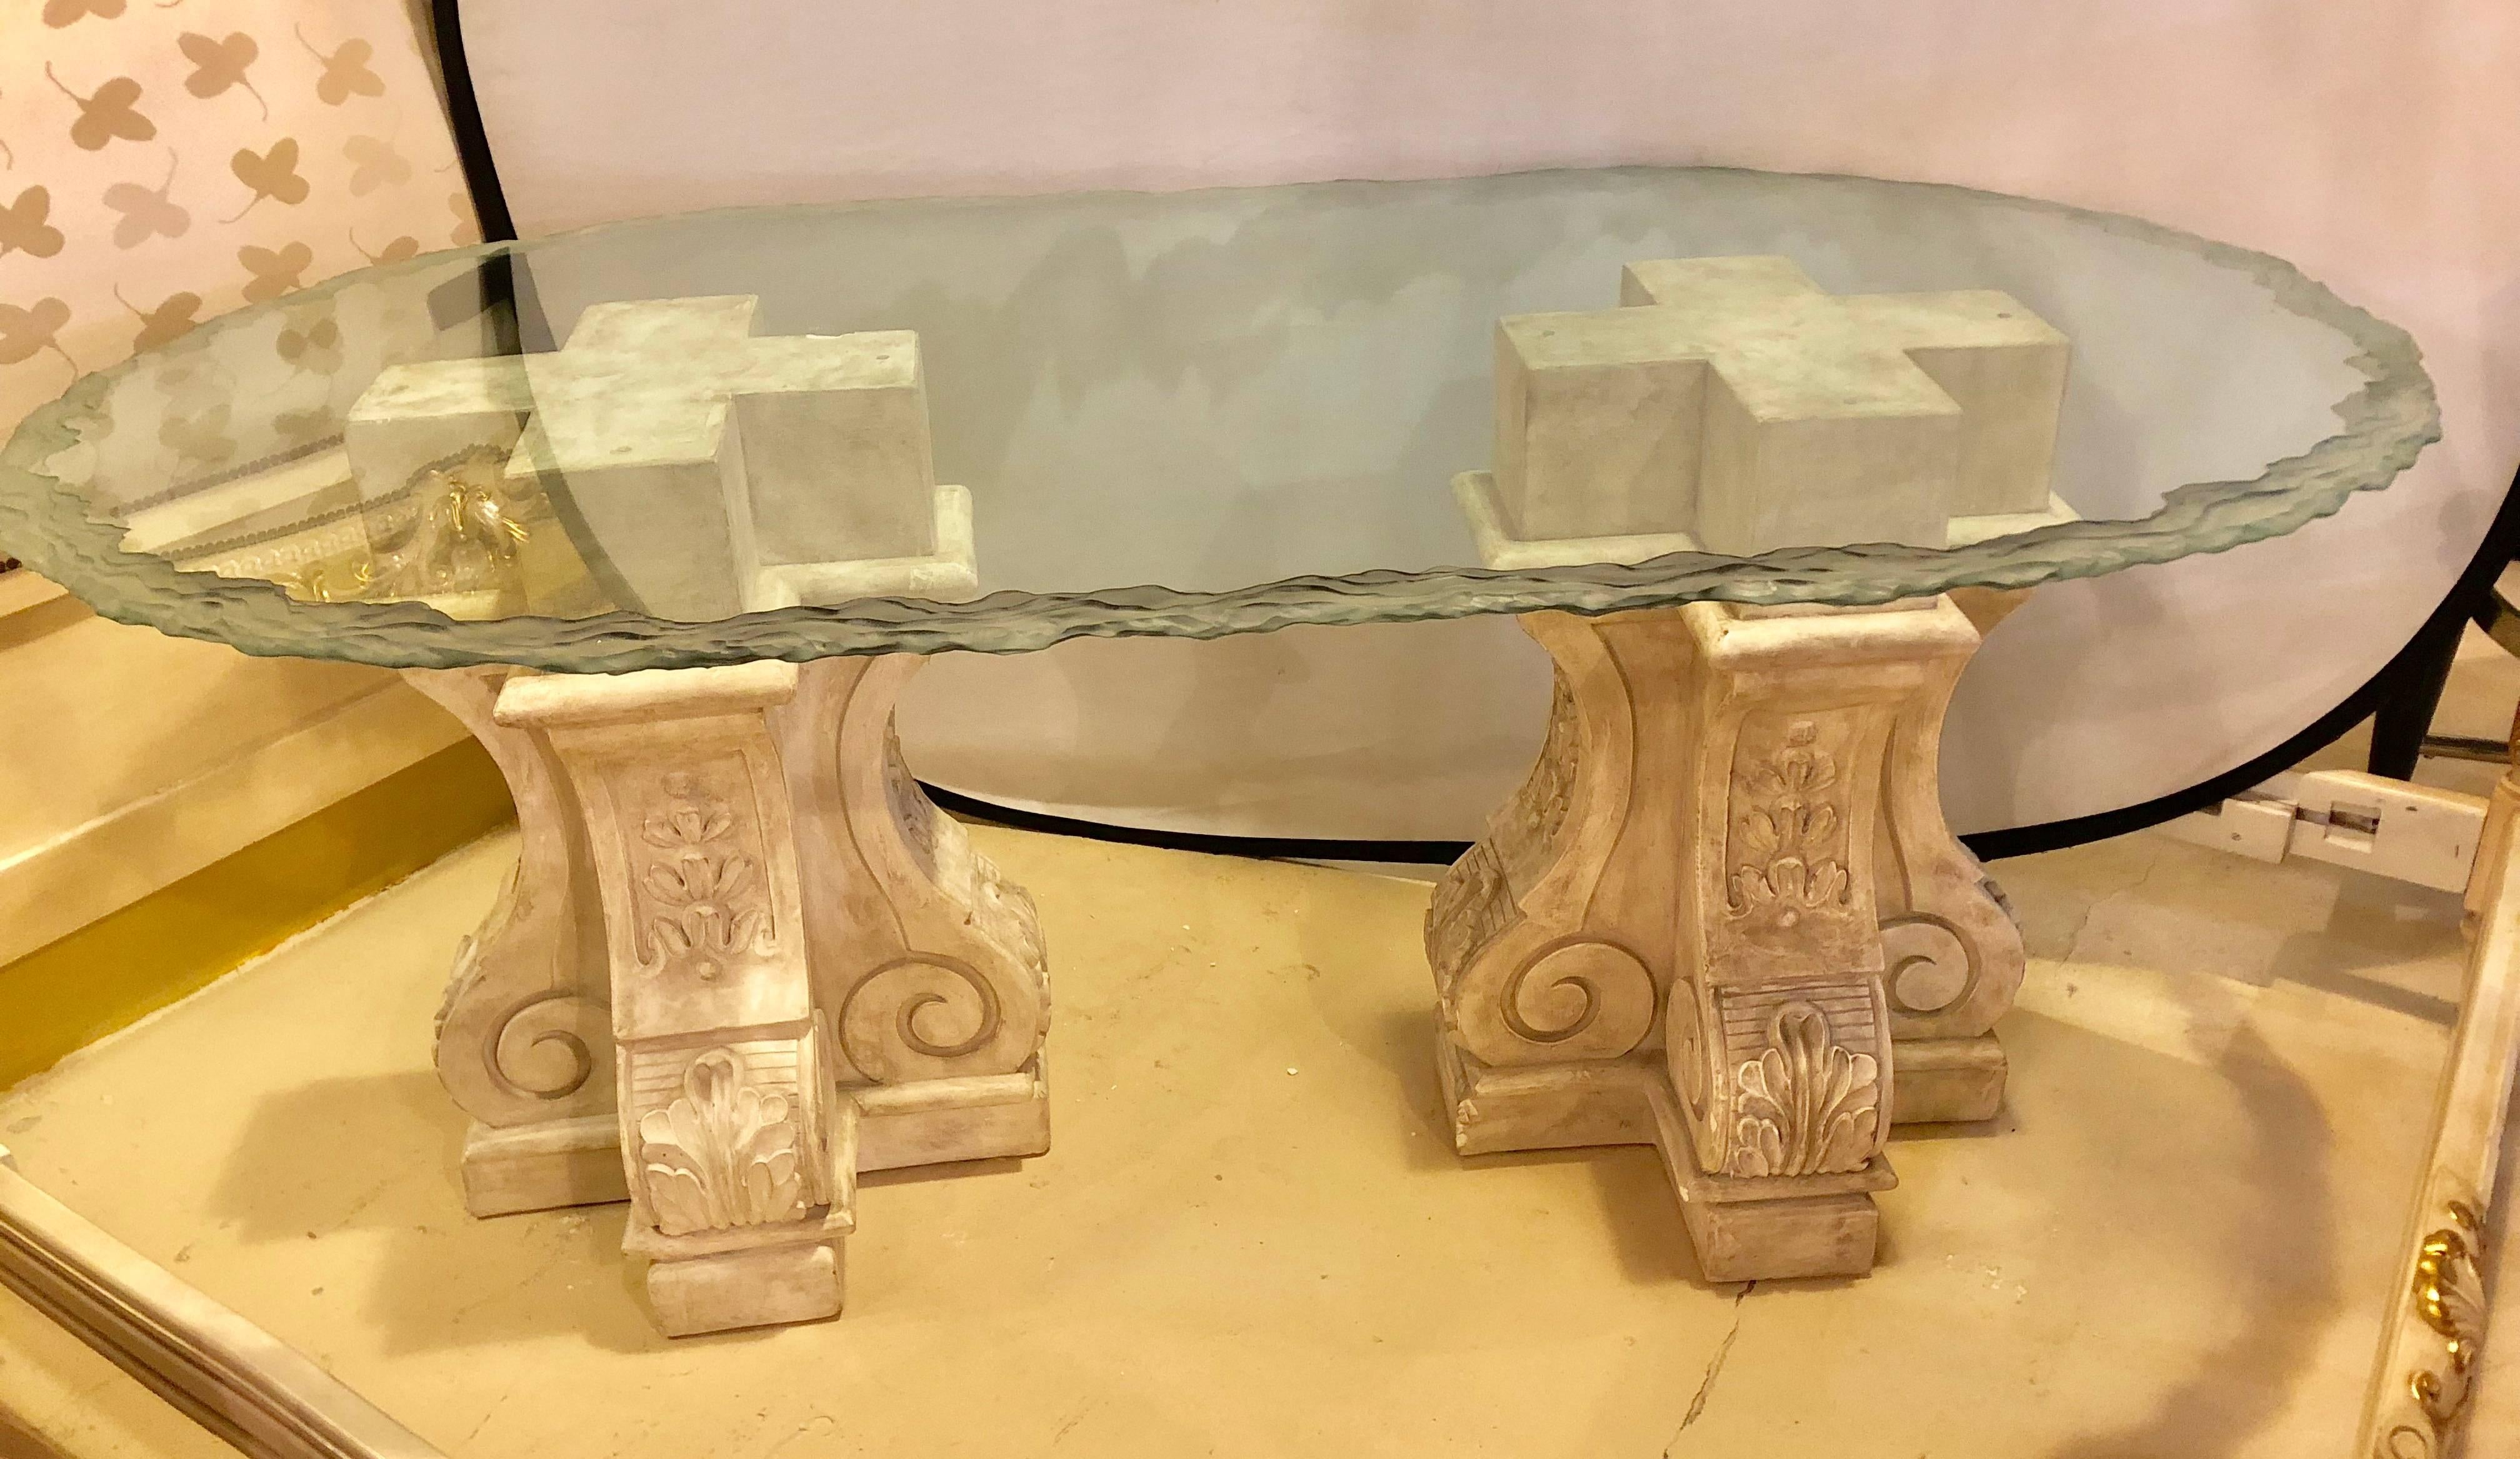 A neoclassical double column glass top Lalique style centre or dining table. A pair of finely detailed composite pedestals legs supporting a clear glass top of oval form with a Lalique style frosted edge. This wonderfully designed and decorated